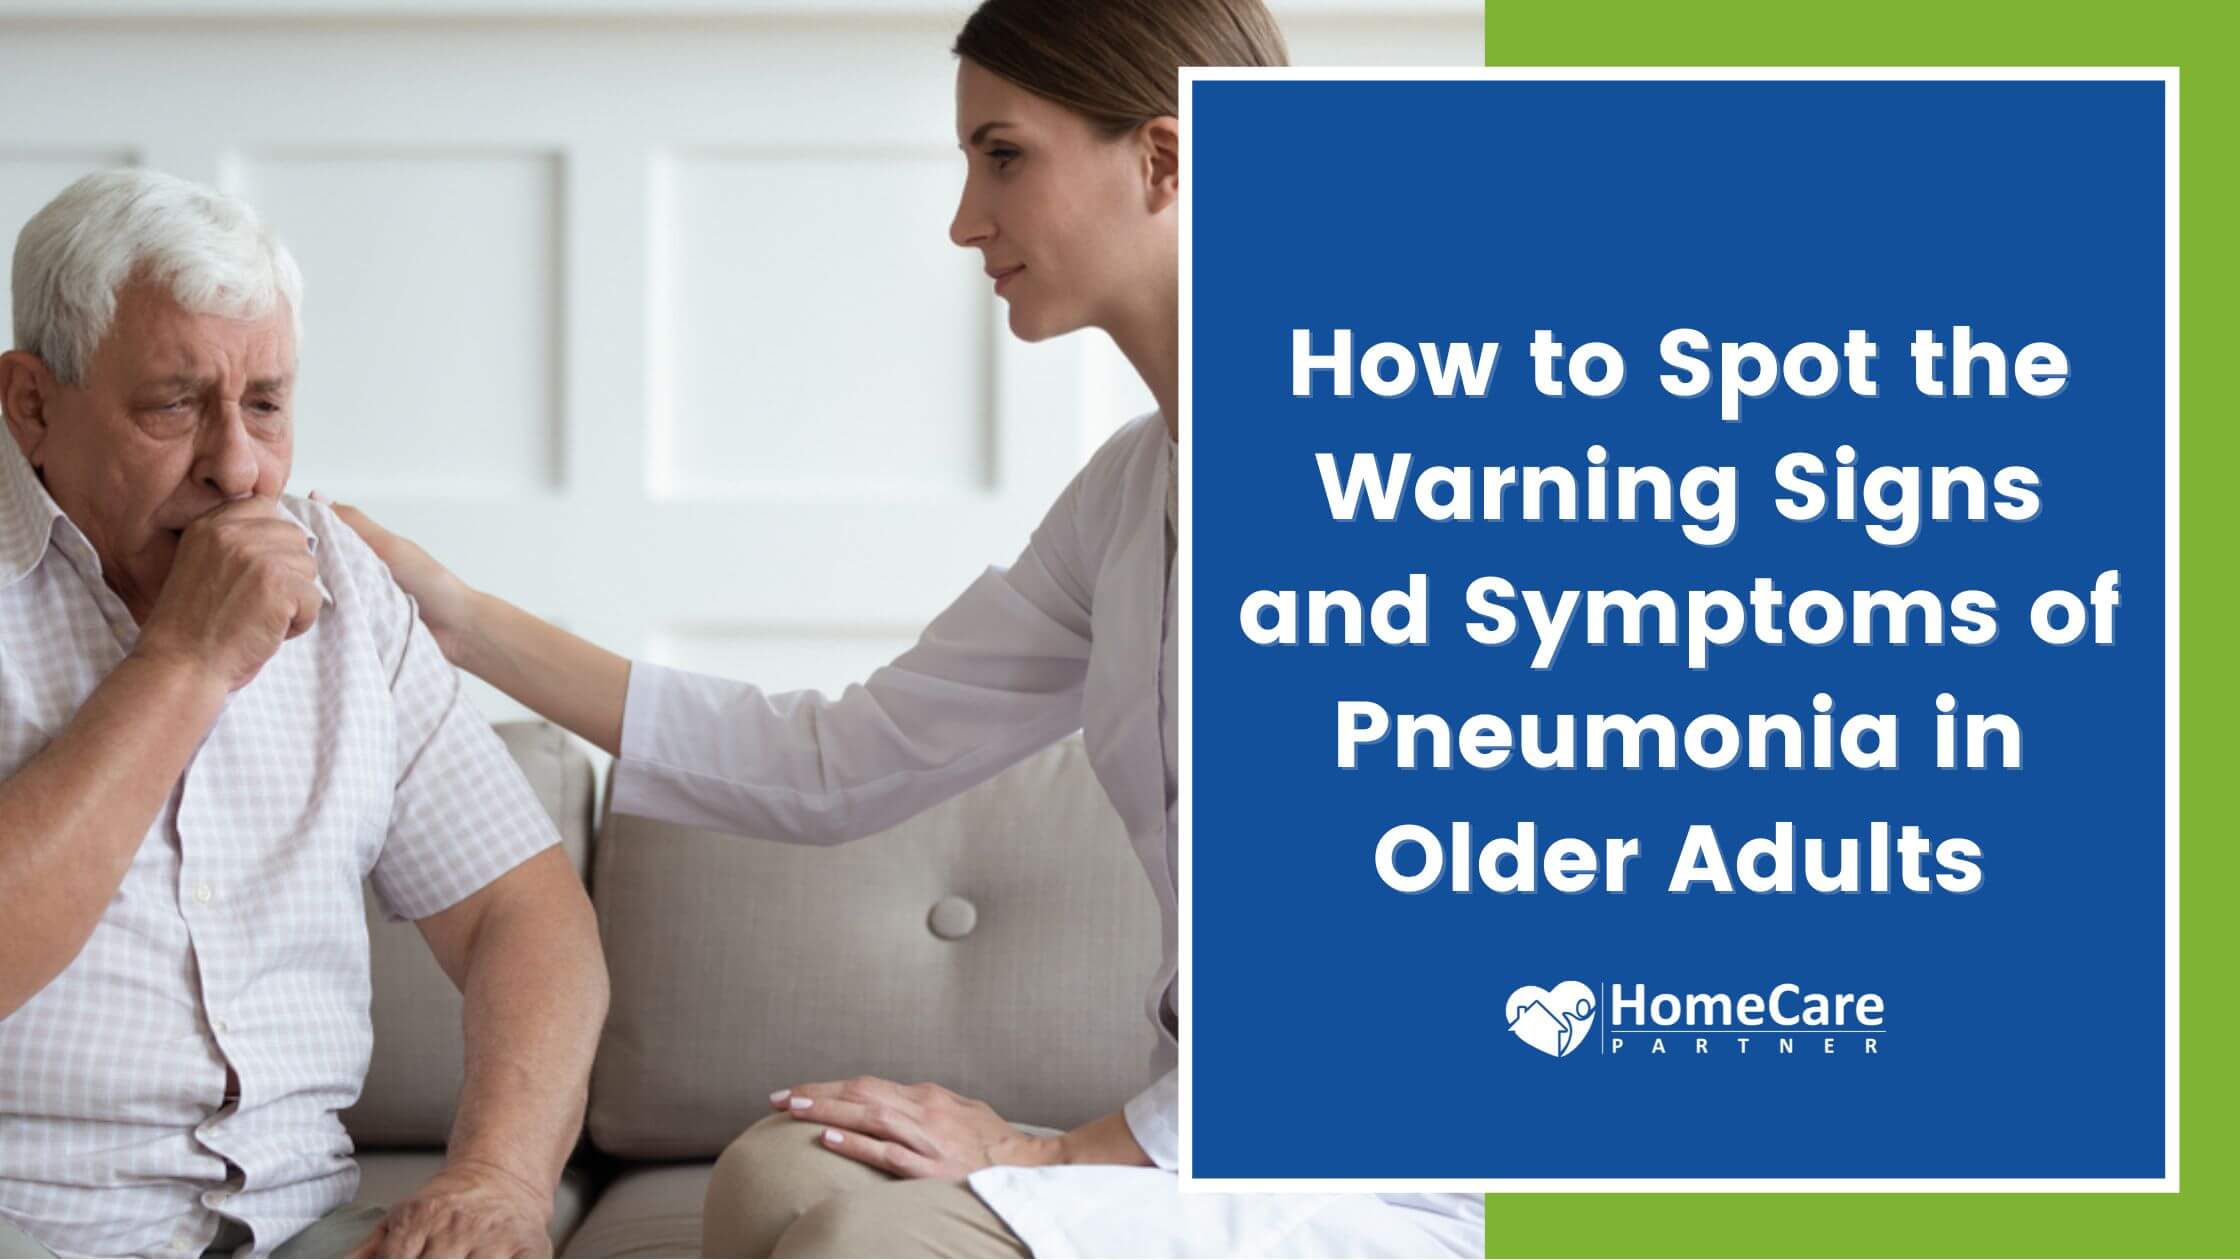 How to Spot the Warning Signs and Symptoms of Pneumonia in Older Adults